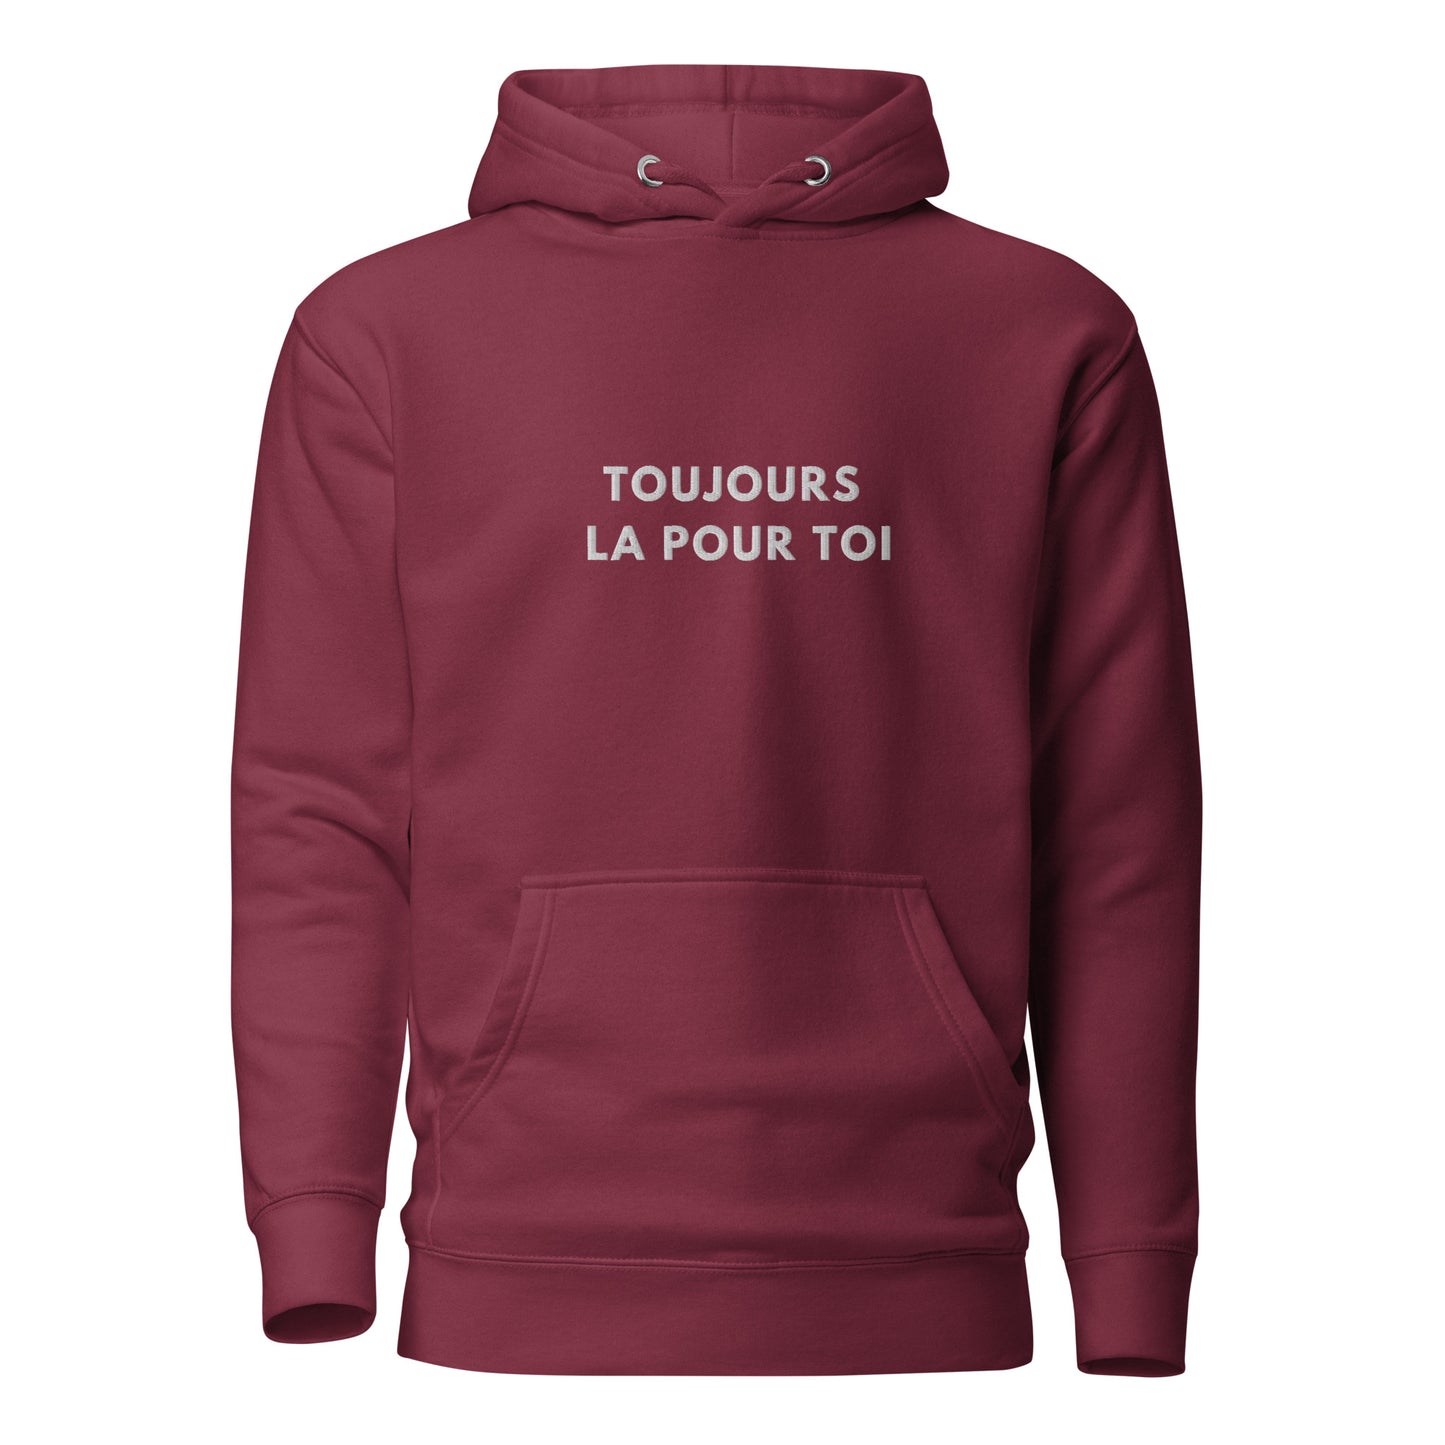 Toujours la pour toi Embroidered Unisex Hoodie